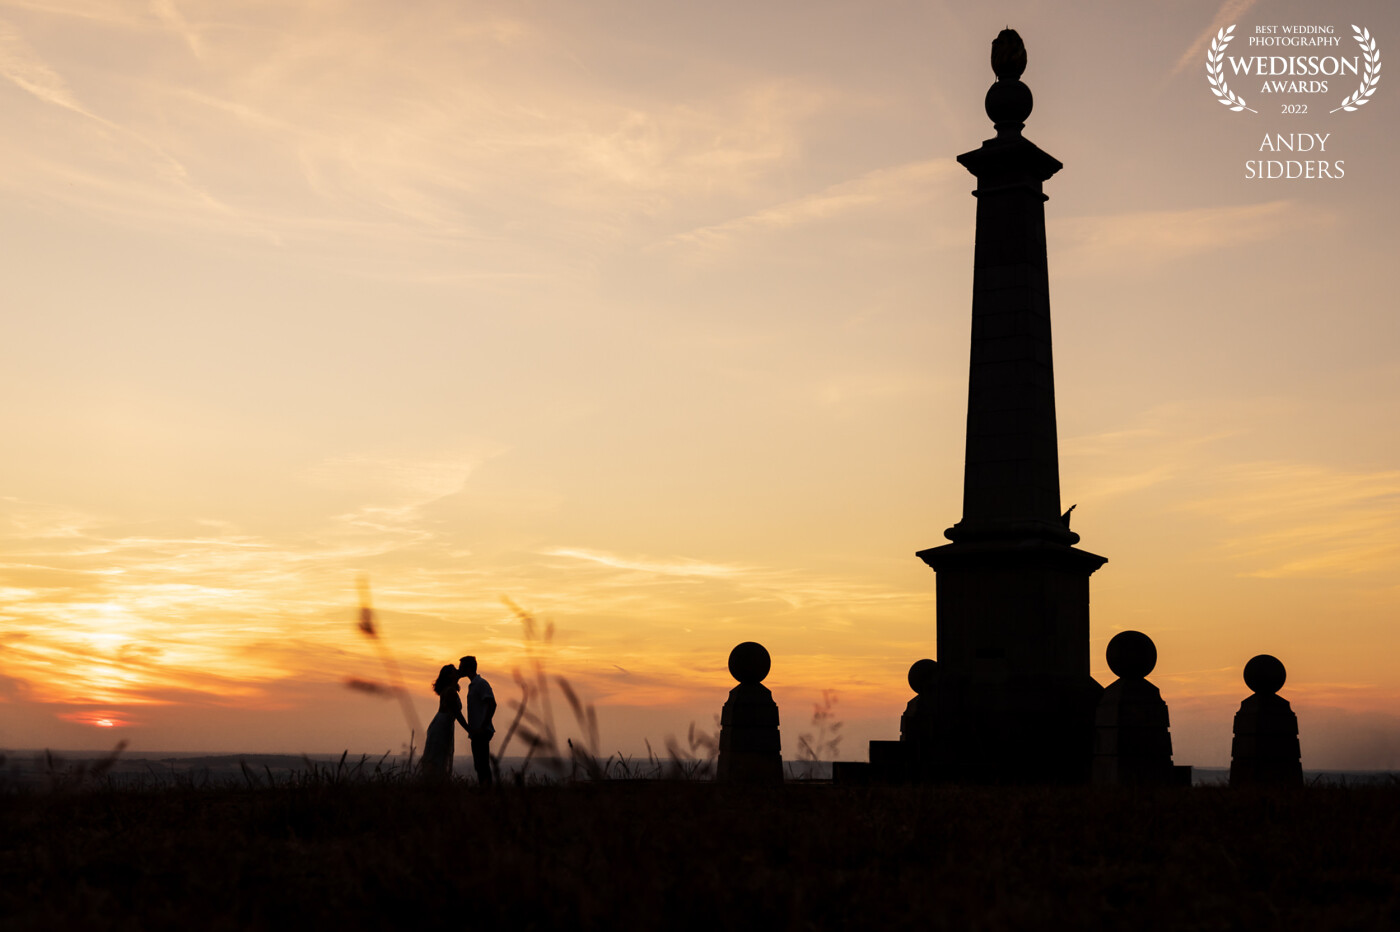 This silhouette was taken on a pre-wedding shoot at Coombe Hill in Buckinghamshire, UK. I lay low on the grass to take the shot and framed the couple between blades of grass in the foreground.